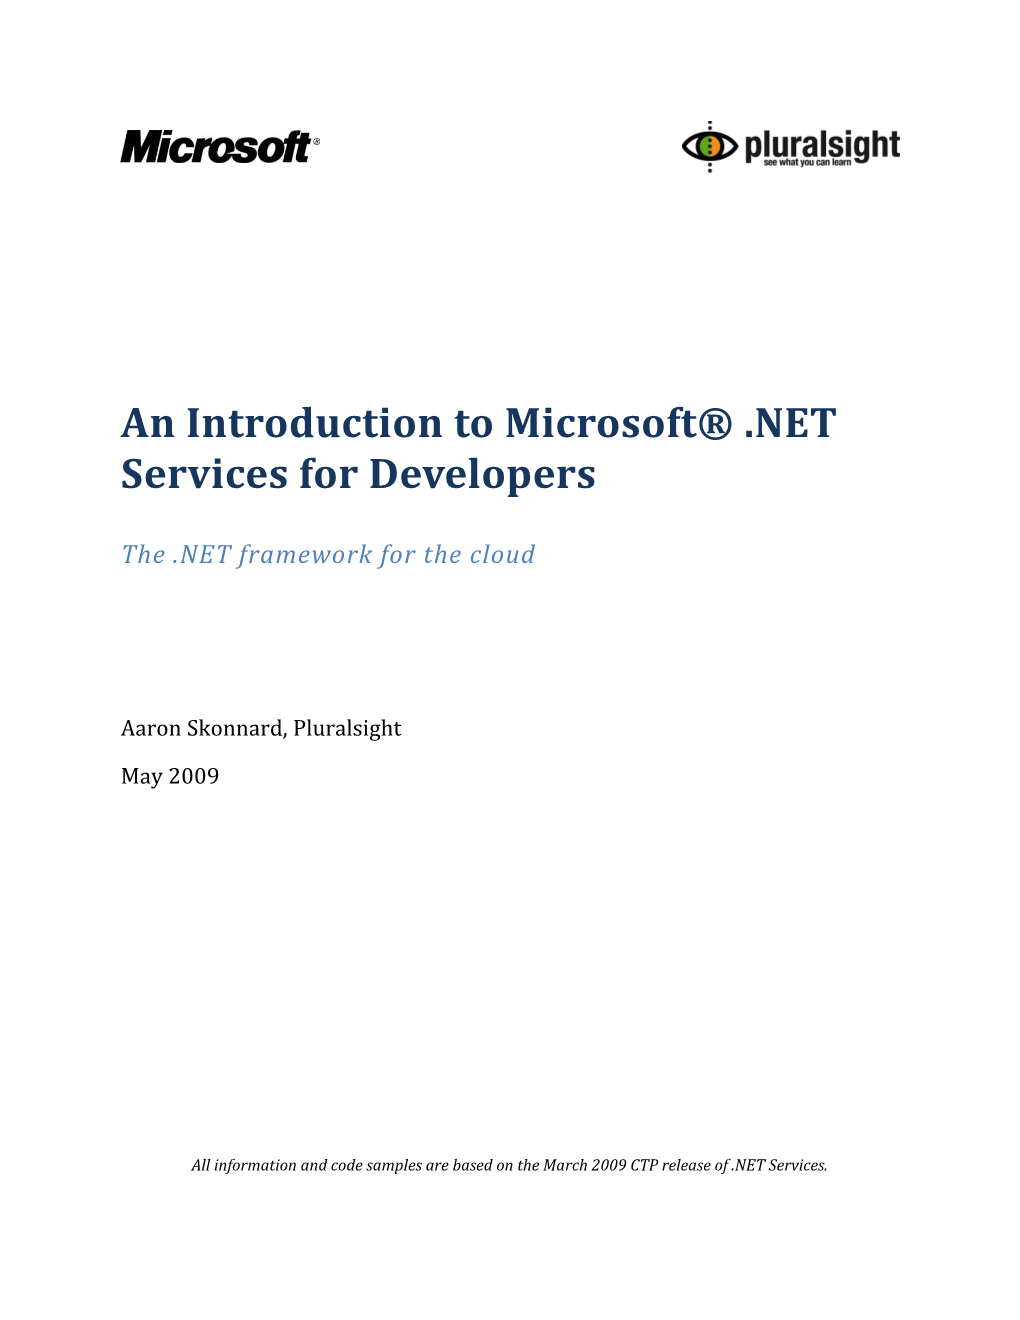 An Introduction to Microsoft .NET Services for Developers